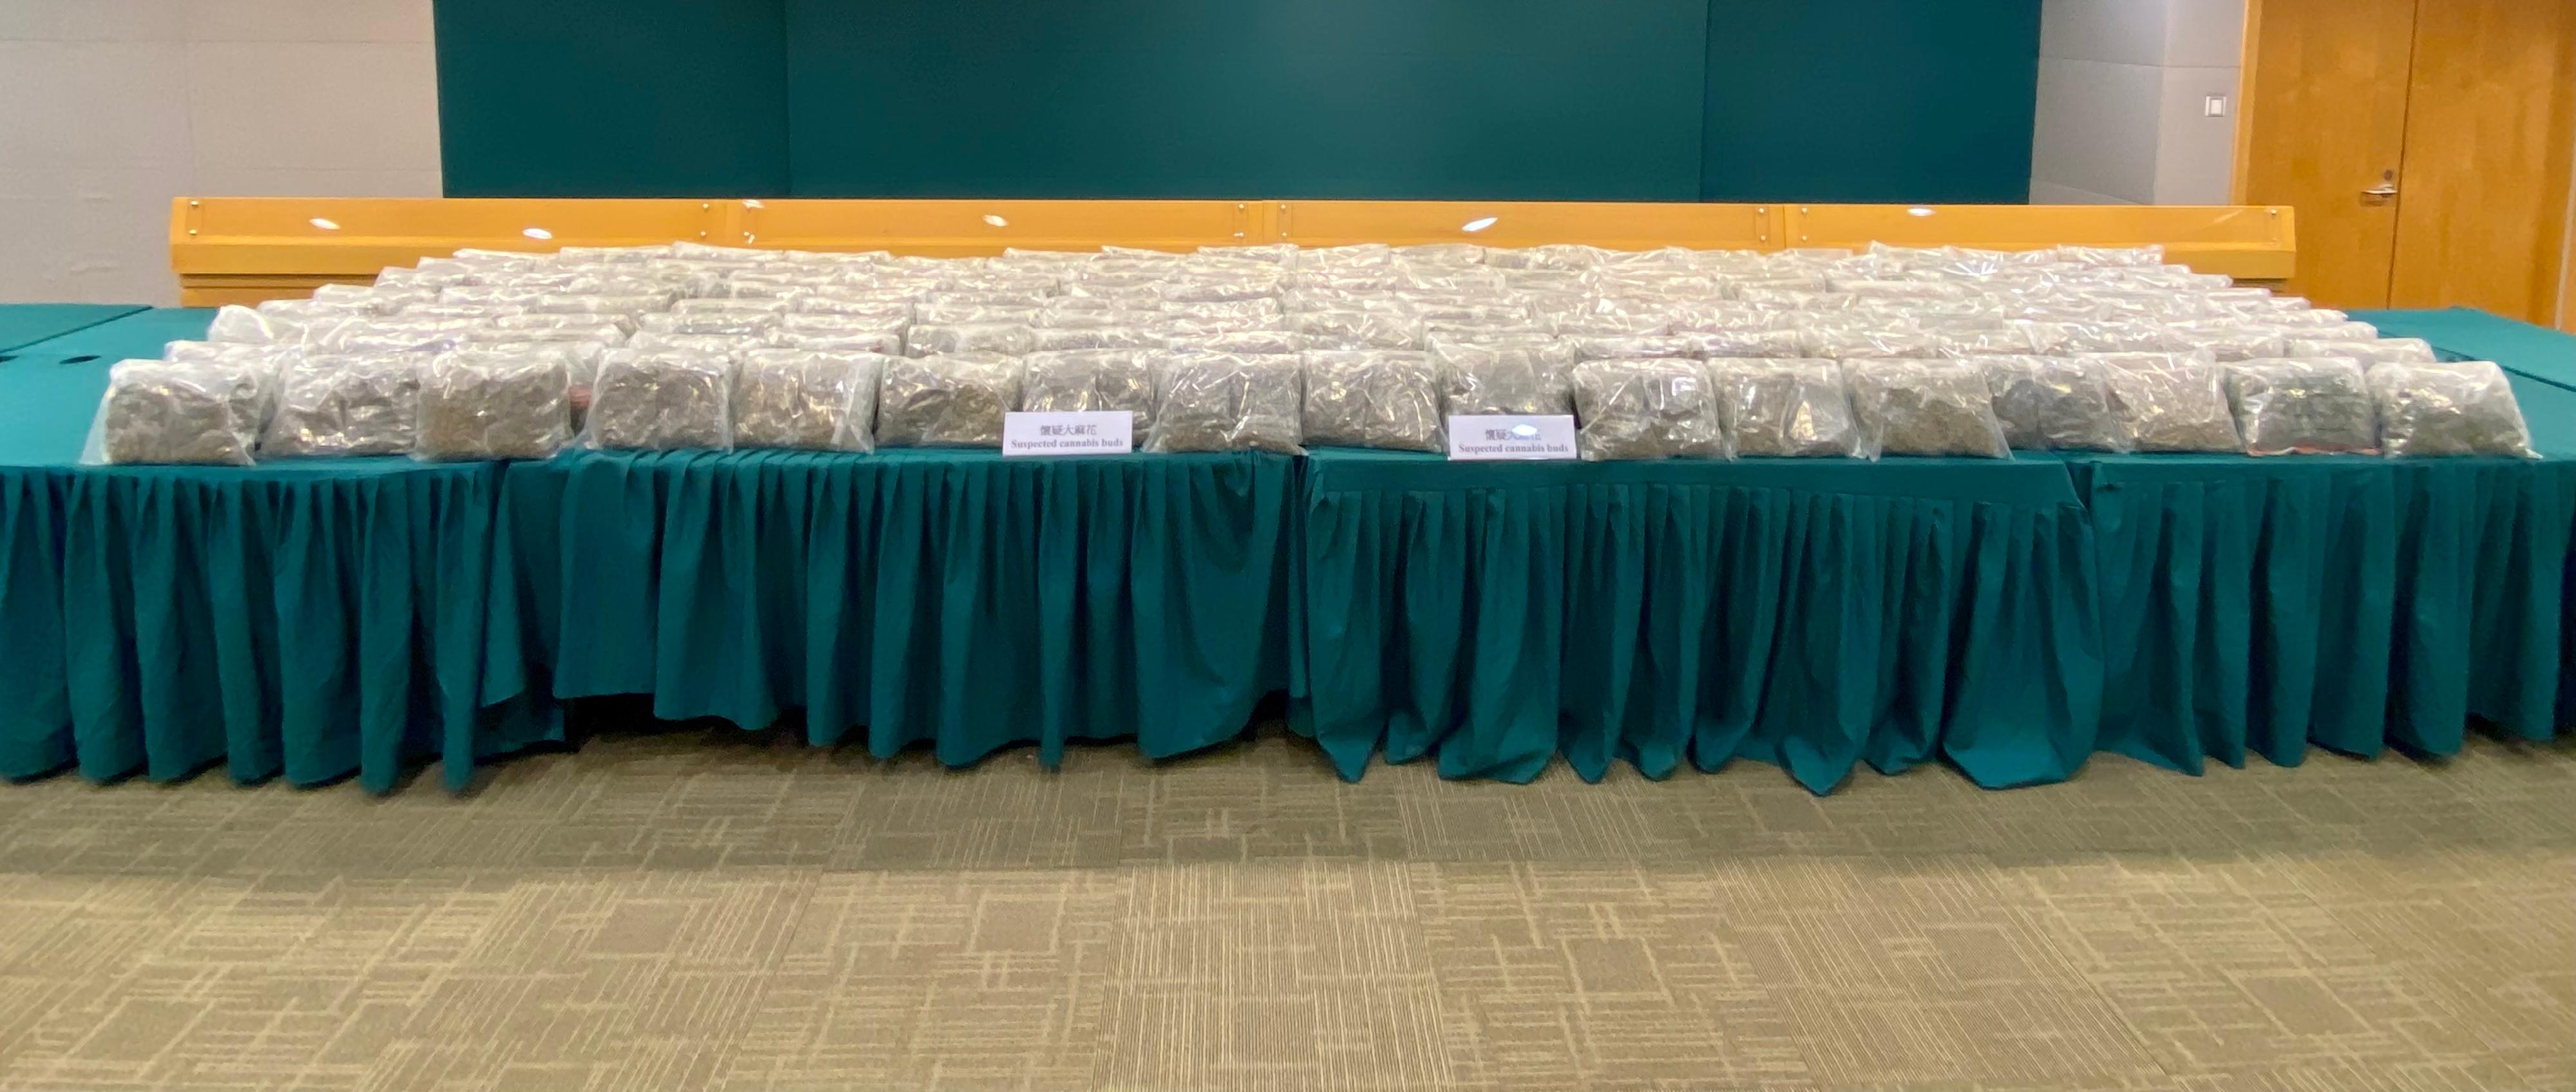 In the light of local demand for drugs during the long holidays, Hong Kong Customs mounted a special operation from November 1 to today (December 10) to combat party drug trafficking activities. Different kinds of party drugs with a total estimated value about $36 million were seized, including about 52 000 tablets of suspected ecstasy and about 153 kilograms of suspected cannabis buds. Photo shows the suspected cannabis buds seized.